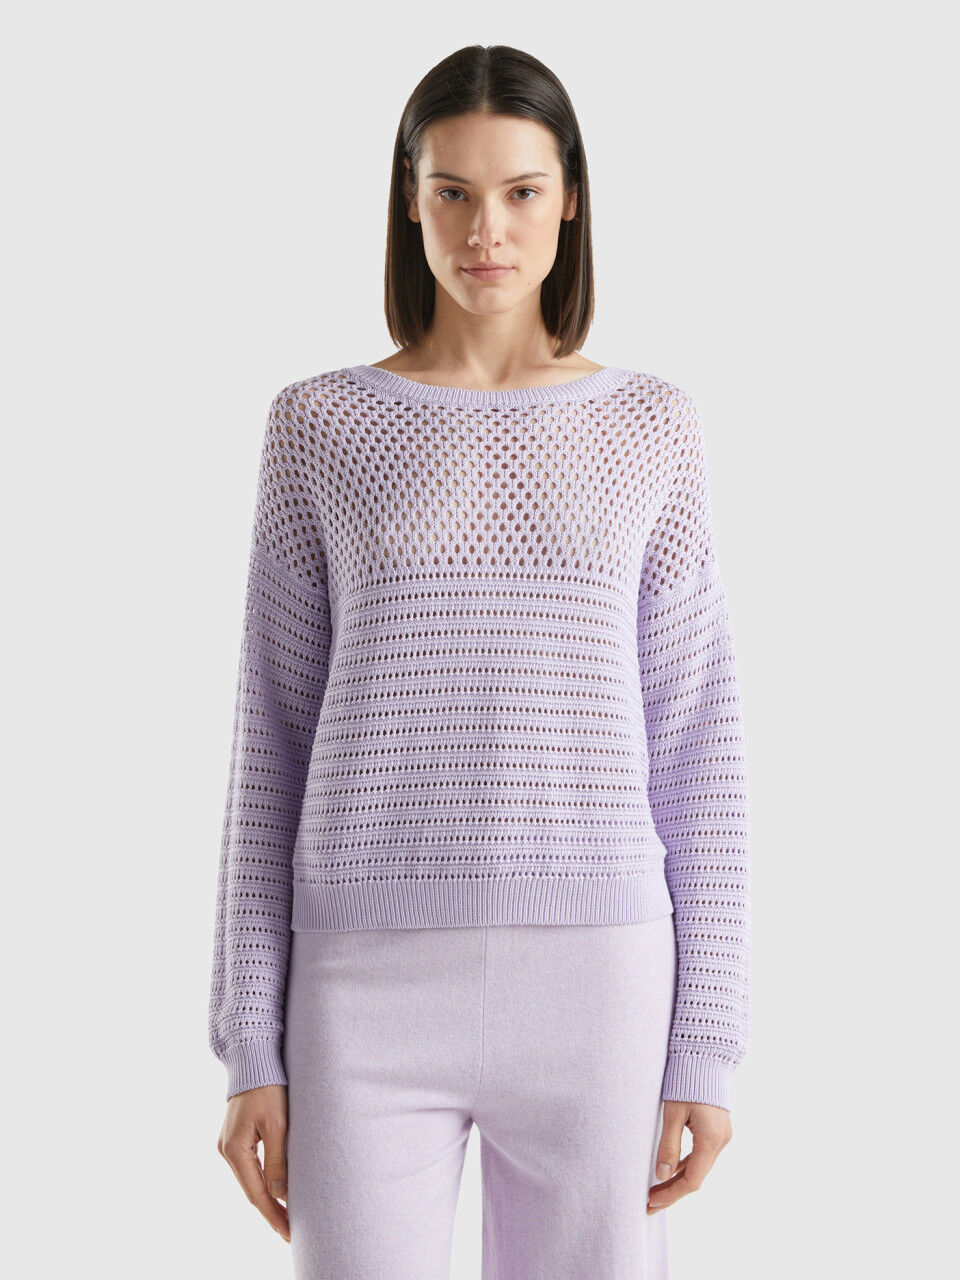 Women's Iconic Knitwear New Collection 2024 | Benetton